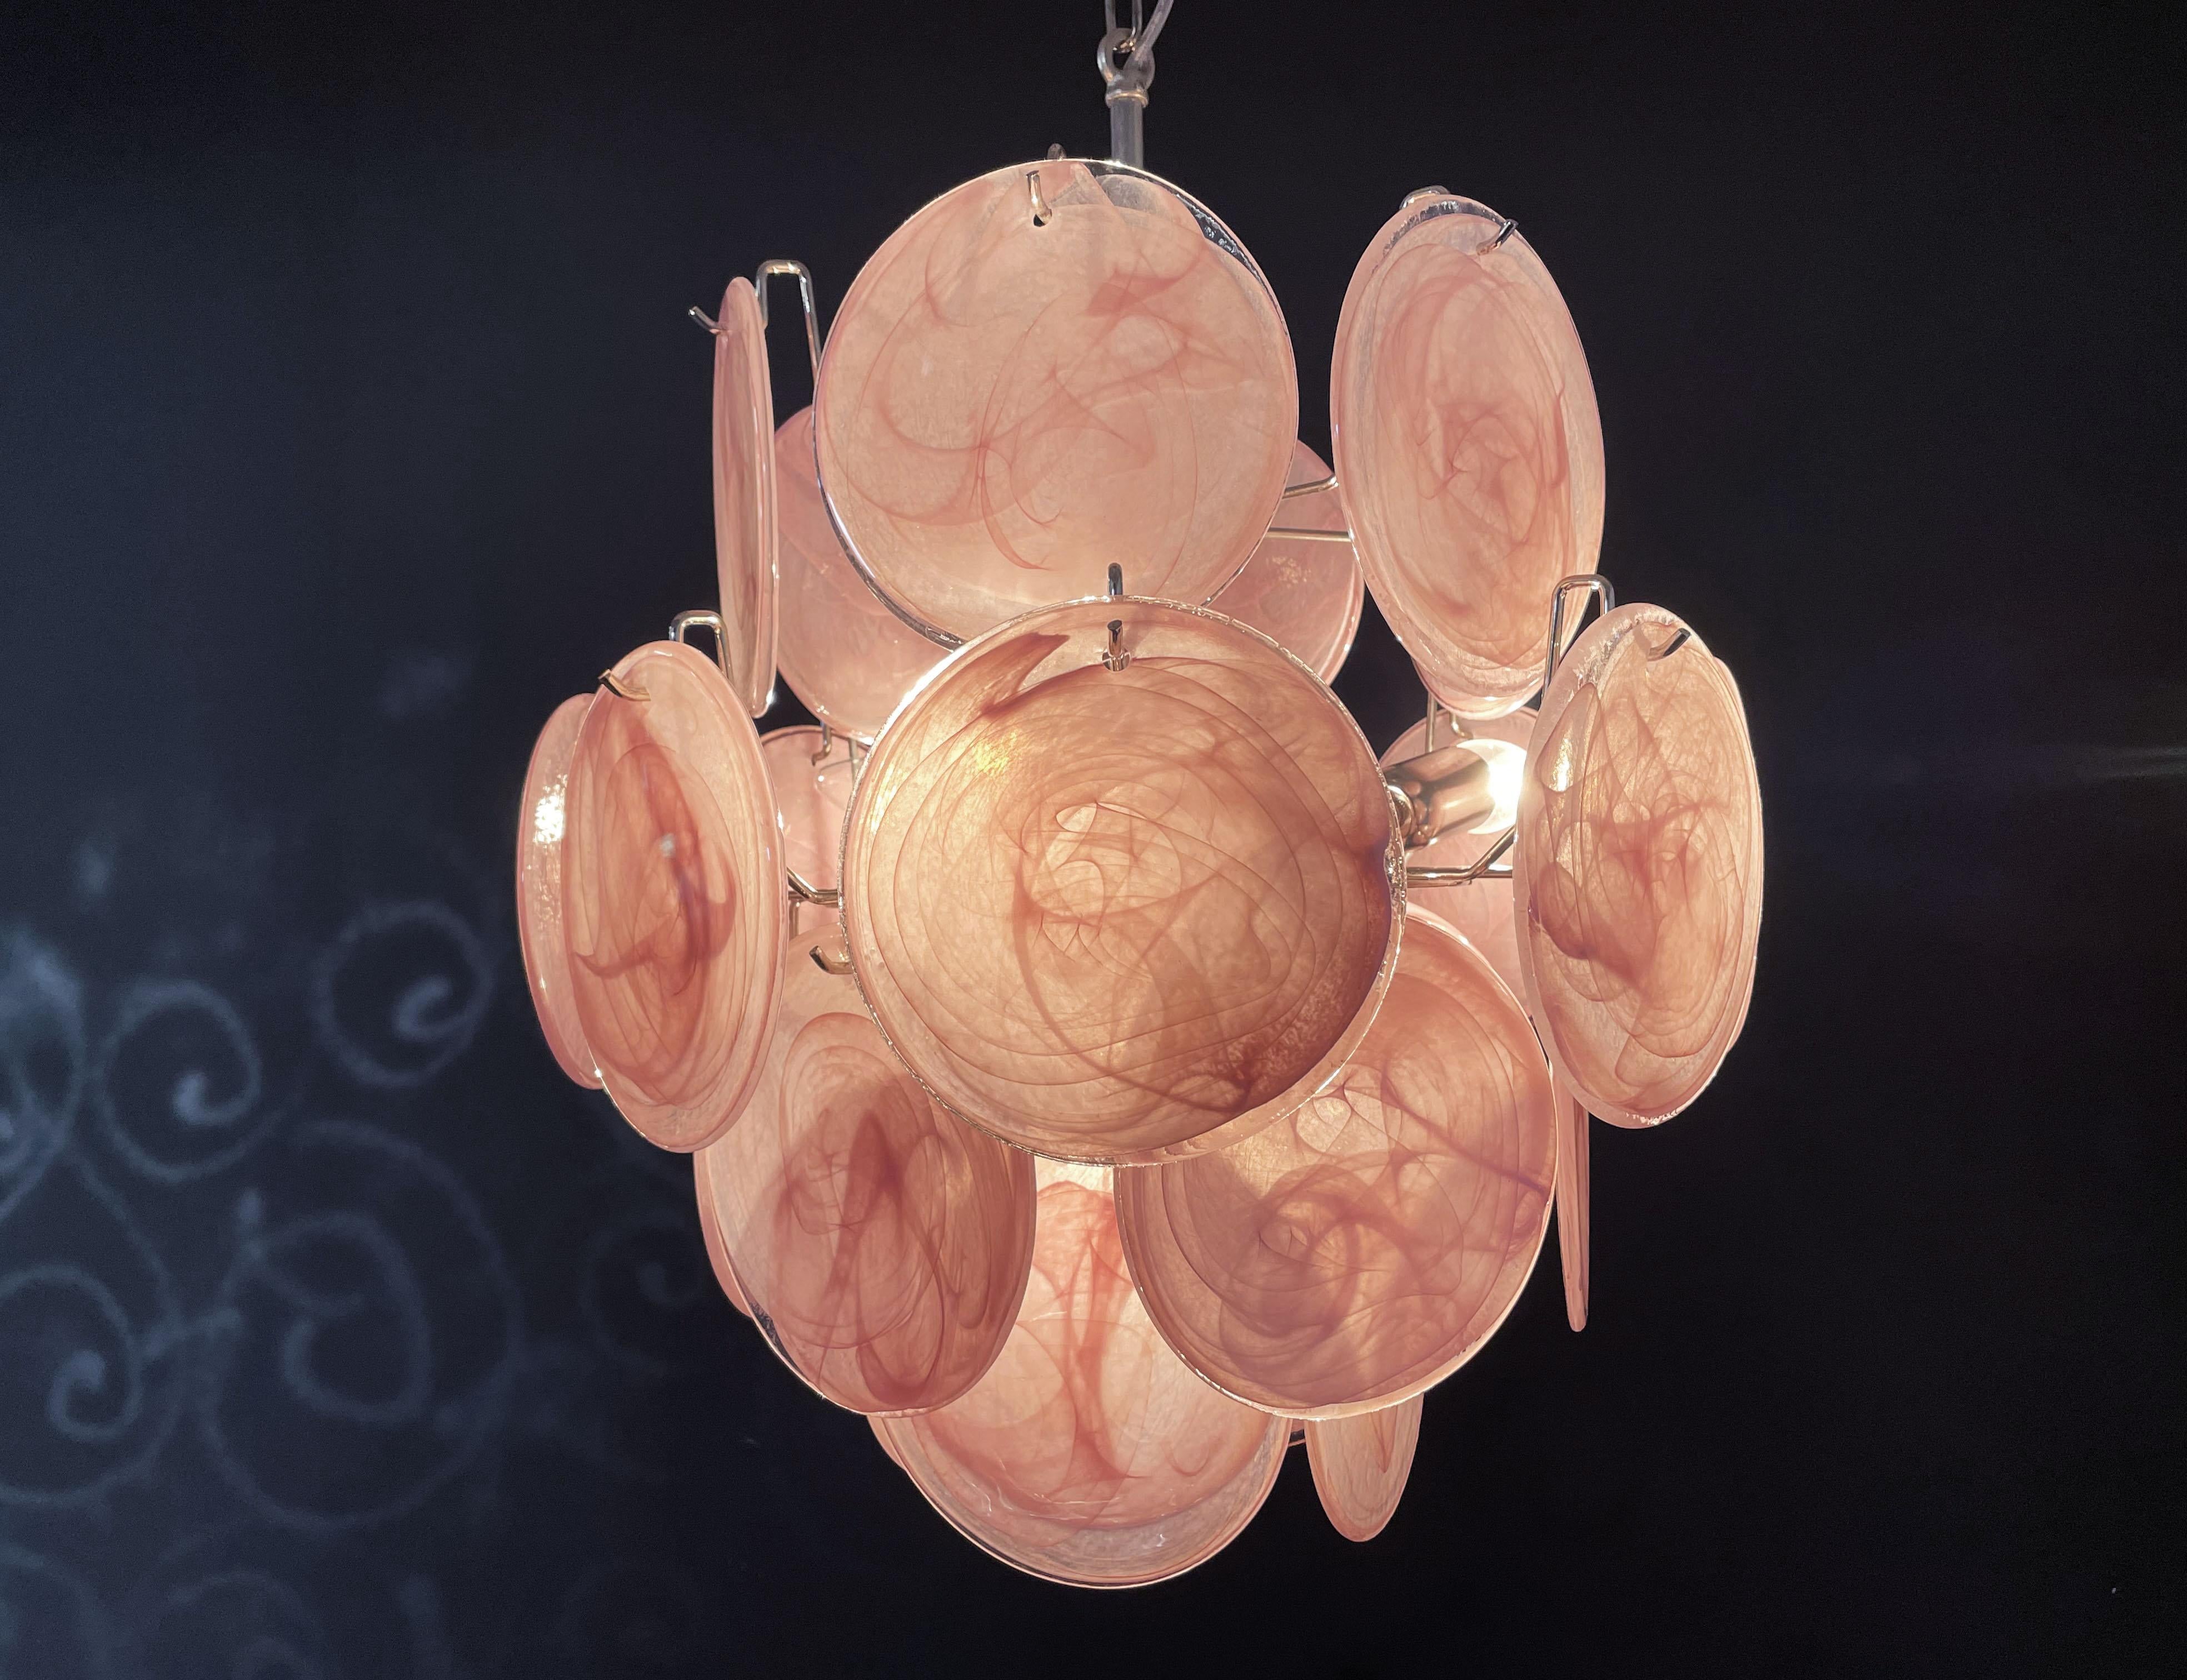 Vintage Italian Murano chandelier in Vistosi style. The chandelier has 24 fantastic iridescent alabaster pink discs in a nickel metal frame.
Period: late XX century
Dimensions: 41,30 inches (105 cm) height with chain; 20,50 inches (52 cm) height